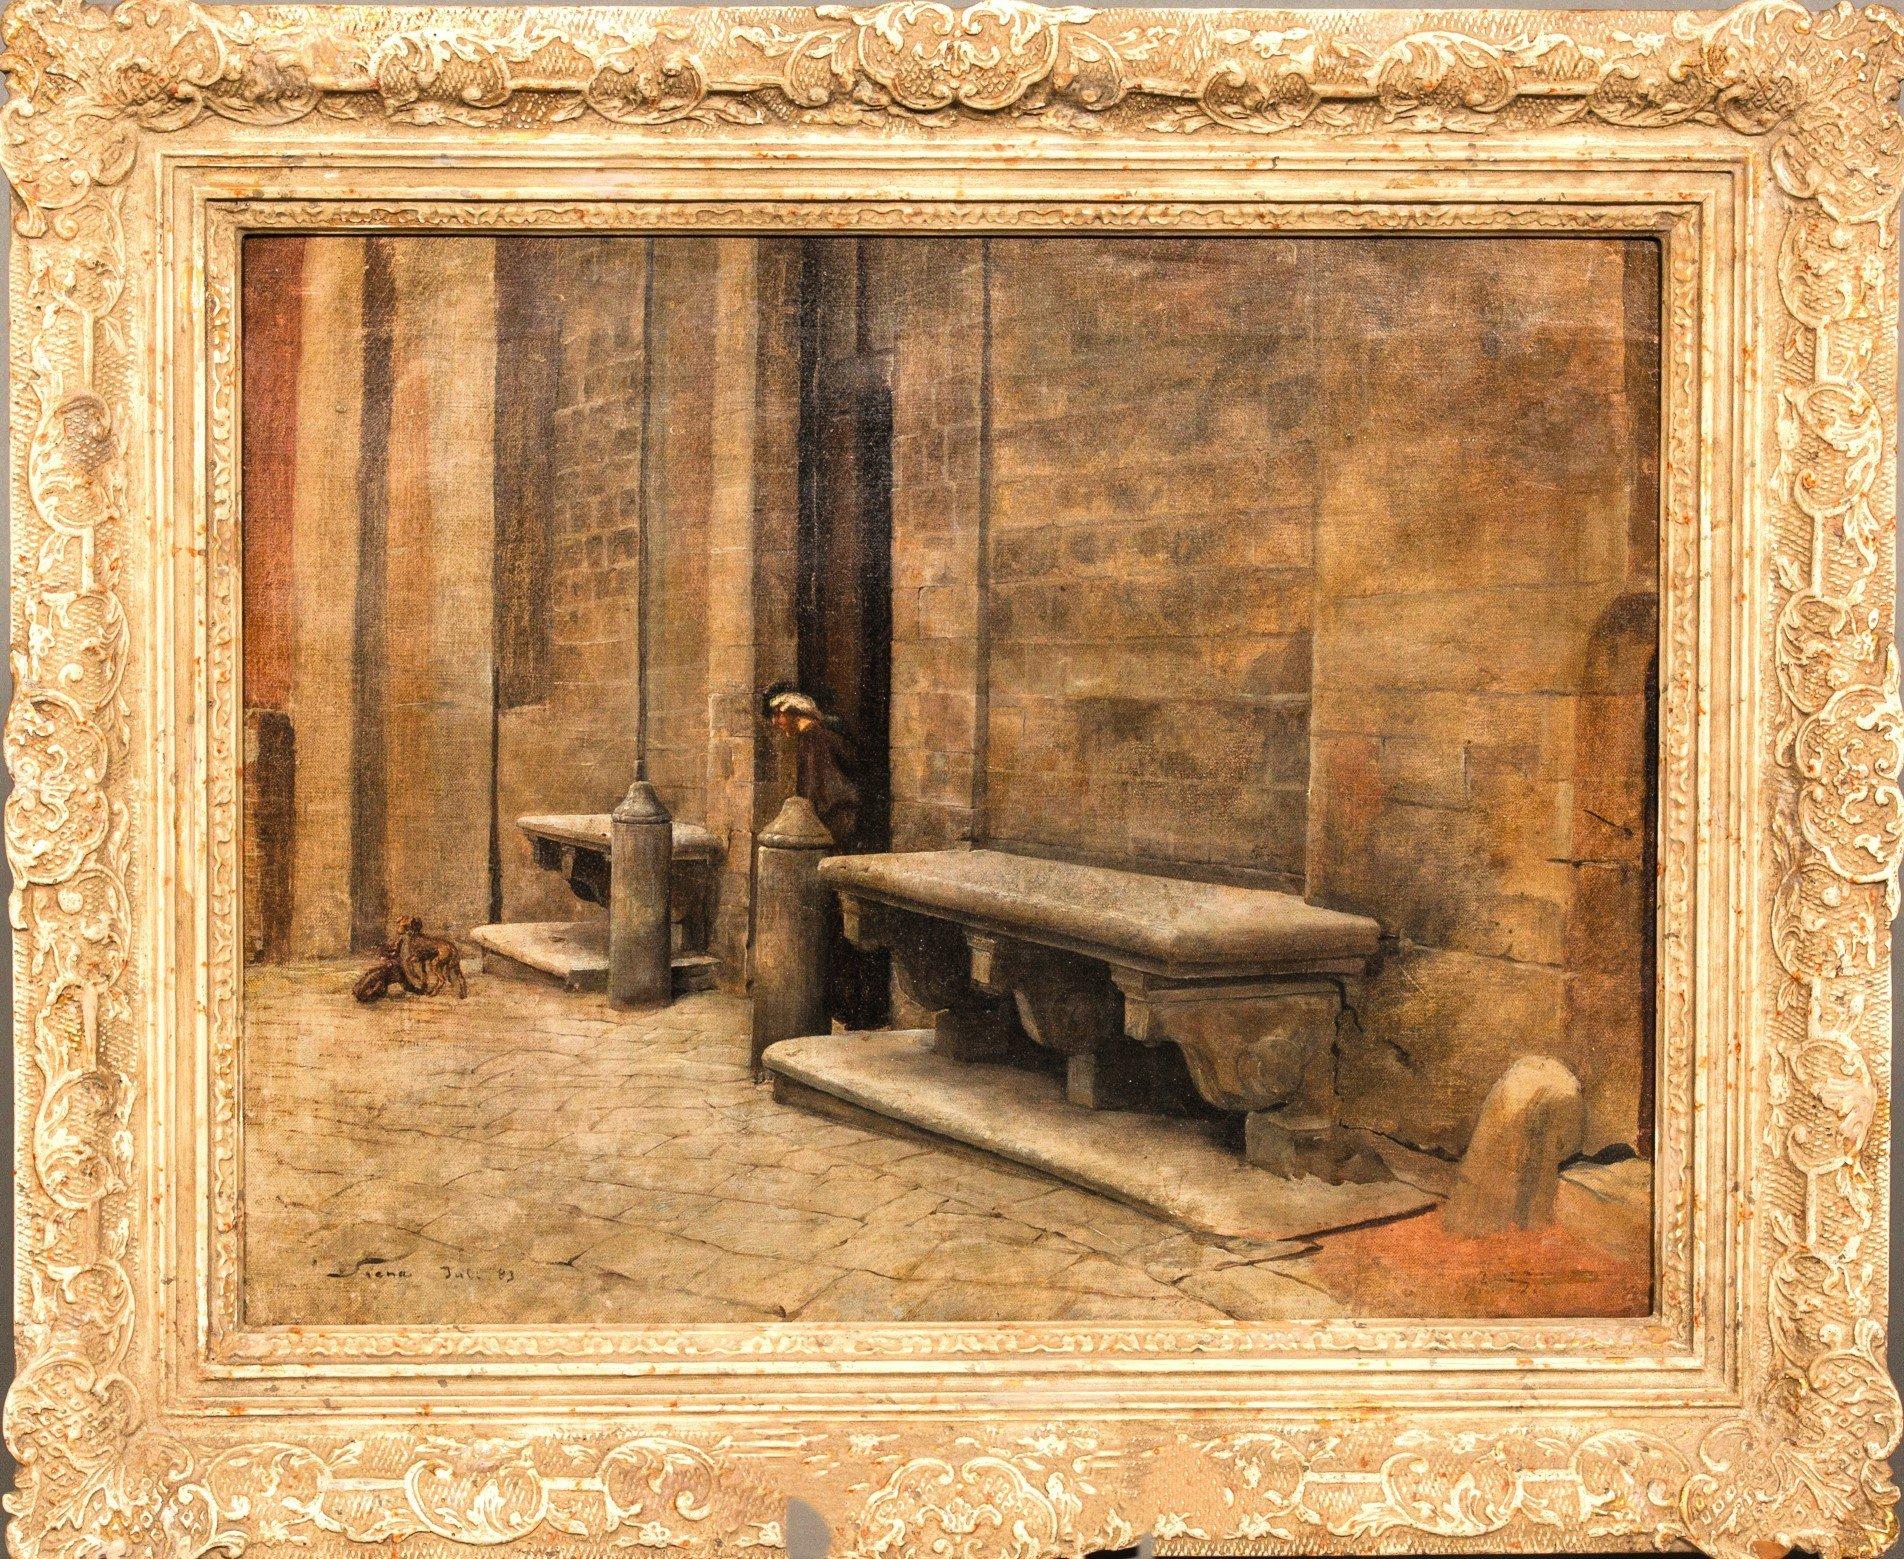 Church courtyard at Siena, oil on canvas - Brown Figurative Painting by German artist